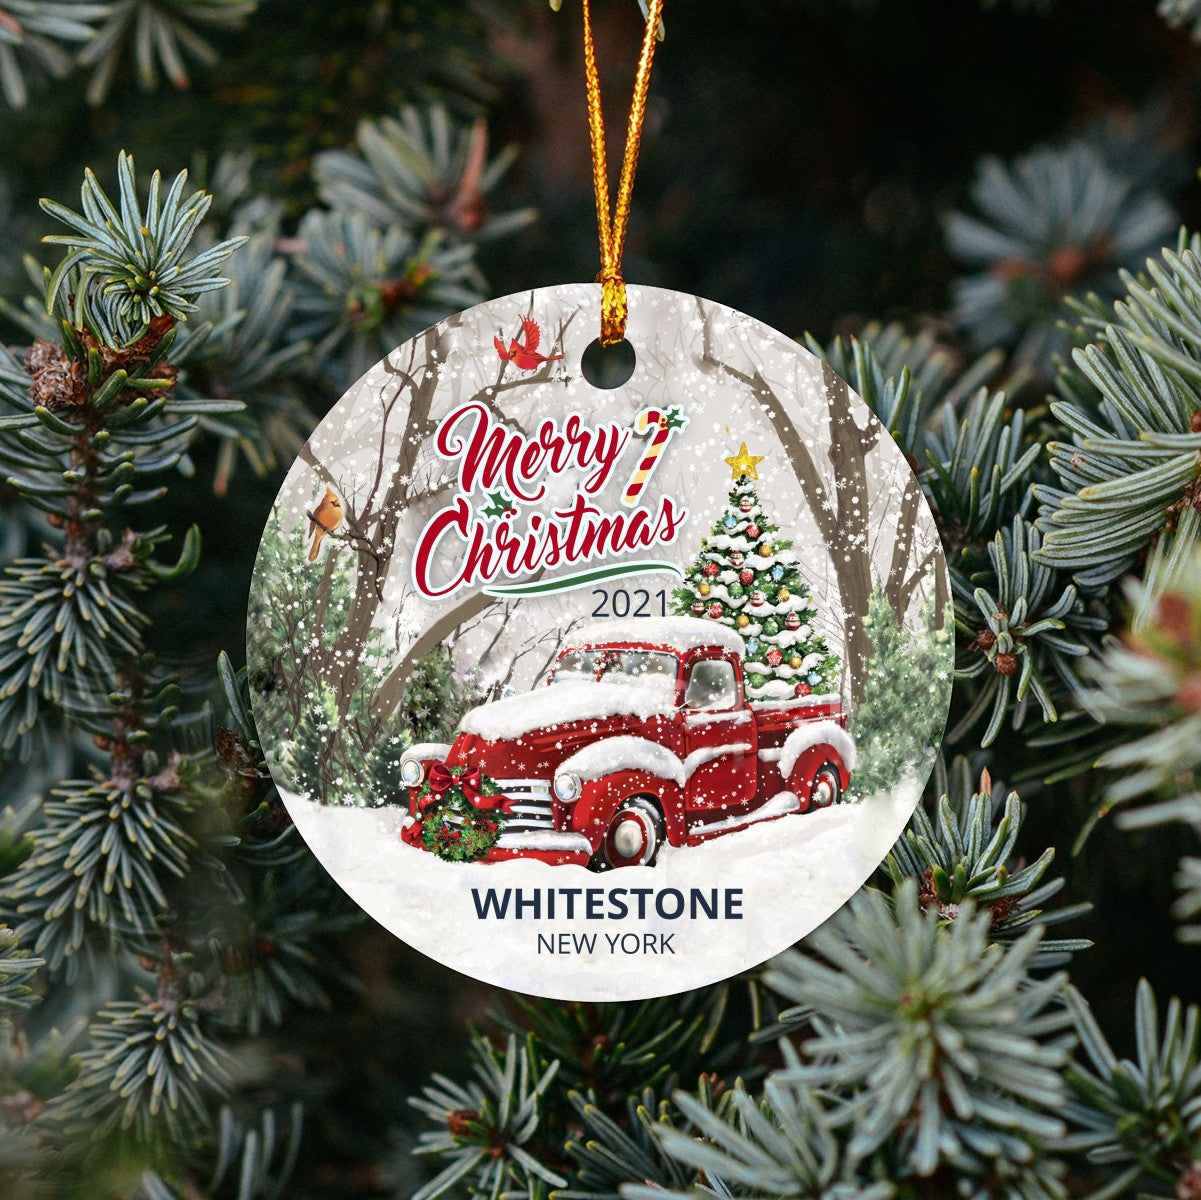 Christmas Tree Ornaments Whitestone - Ornament With Name City, State Whitestone New York NY Ornament - Red Truck Xmas Ornaments 3'' Plastic Gift For Family, Friend And Housewarming